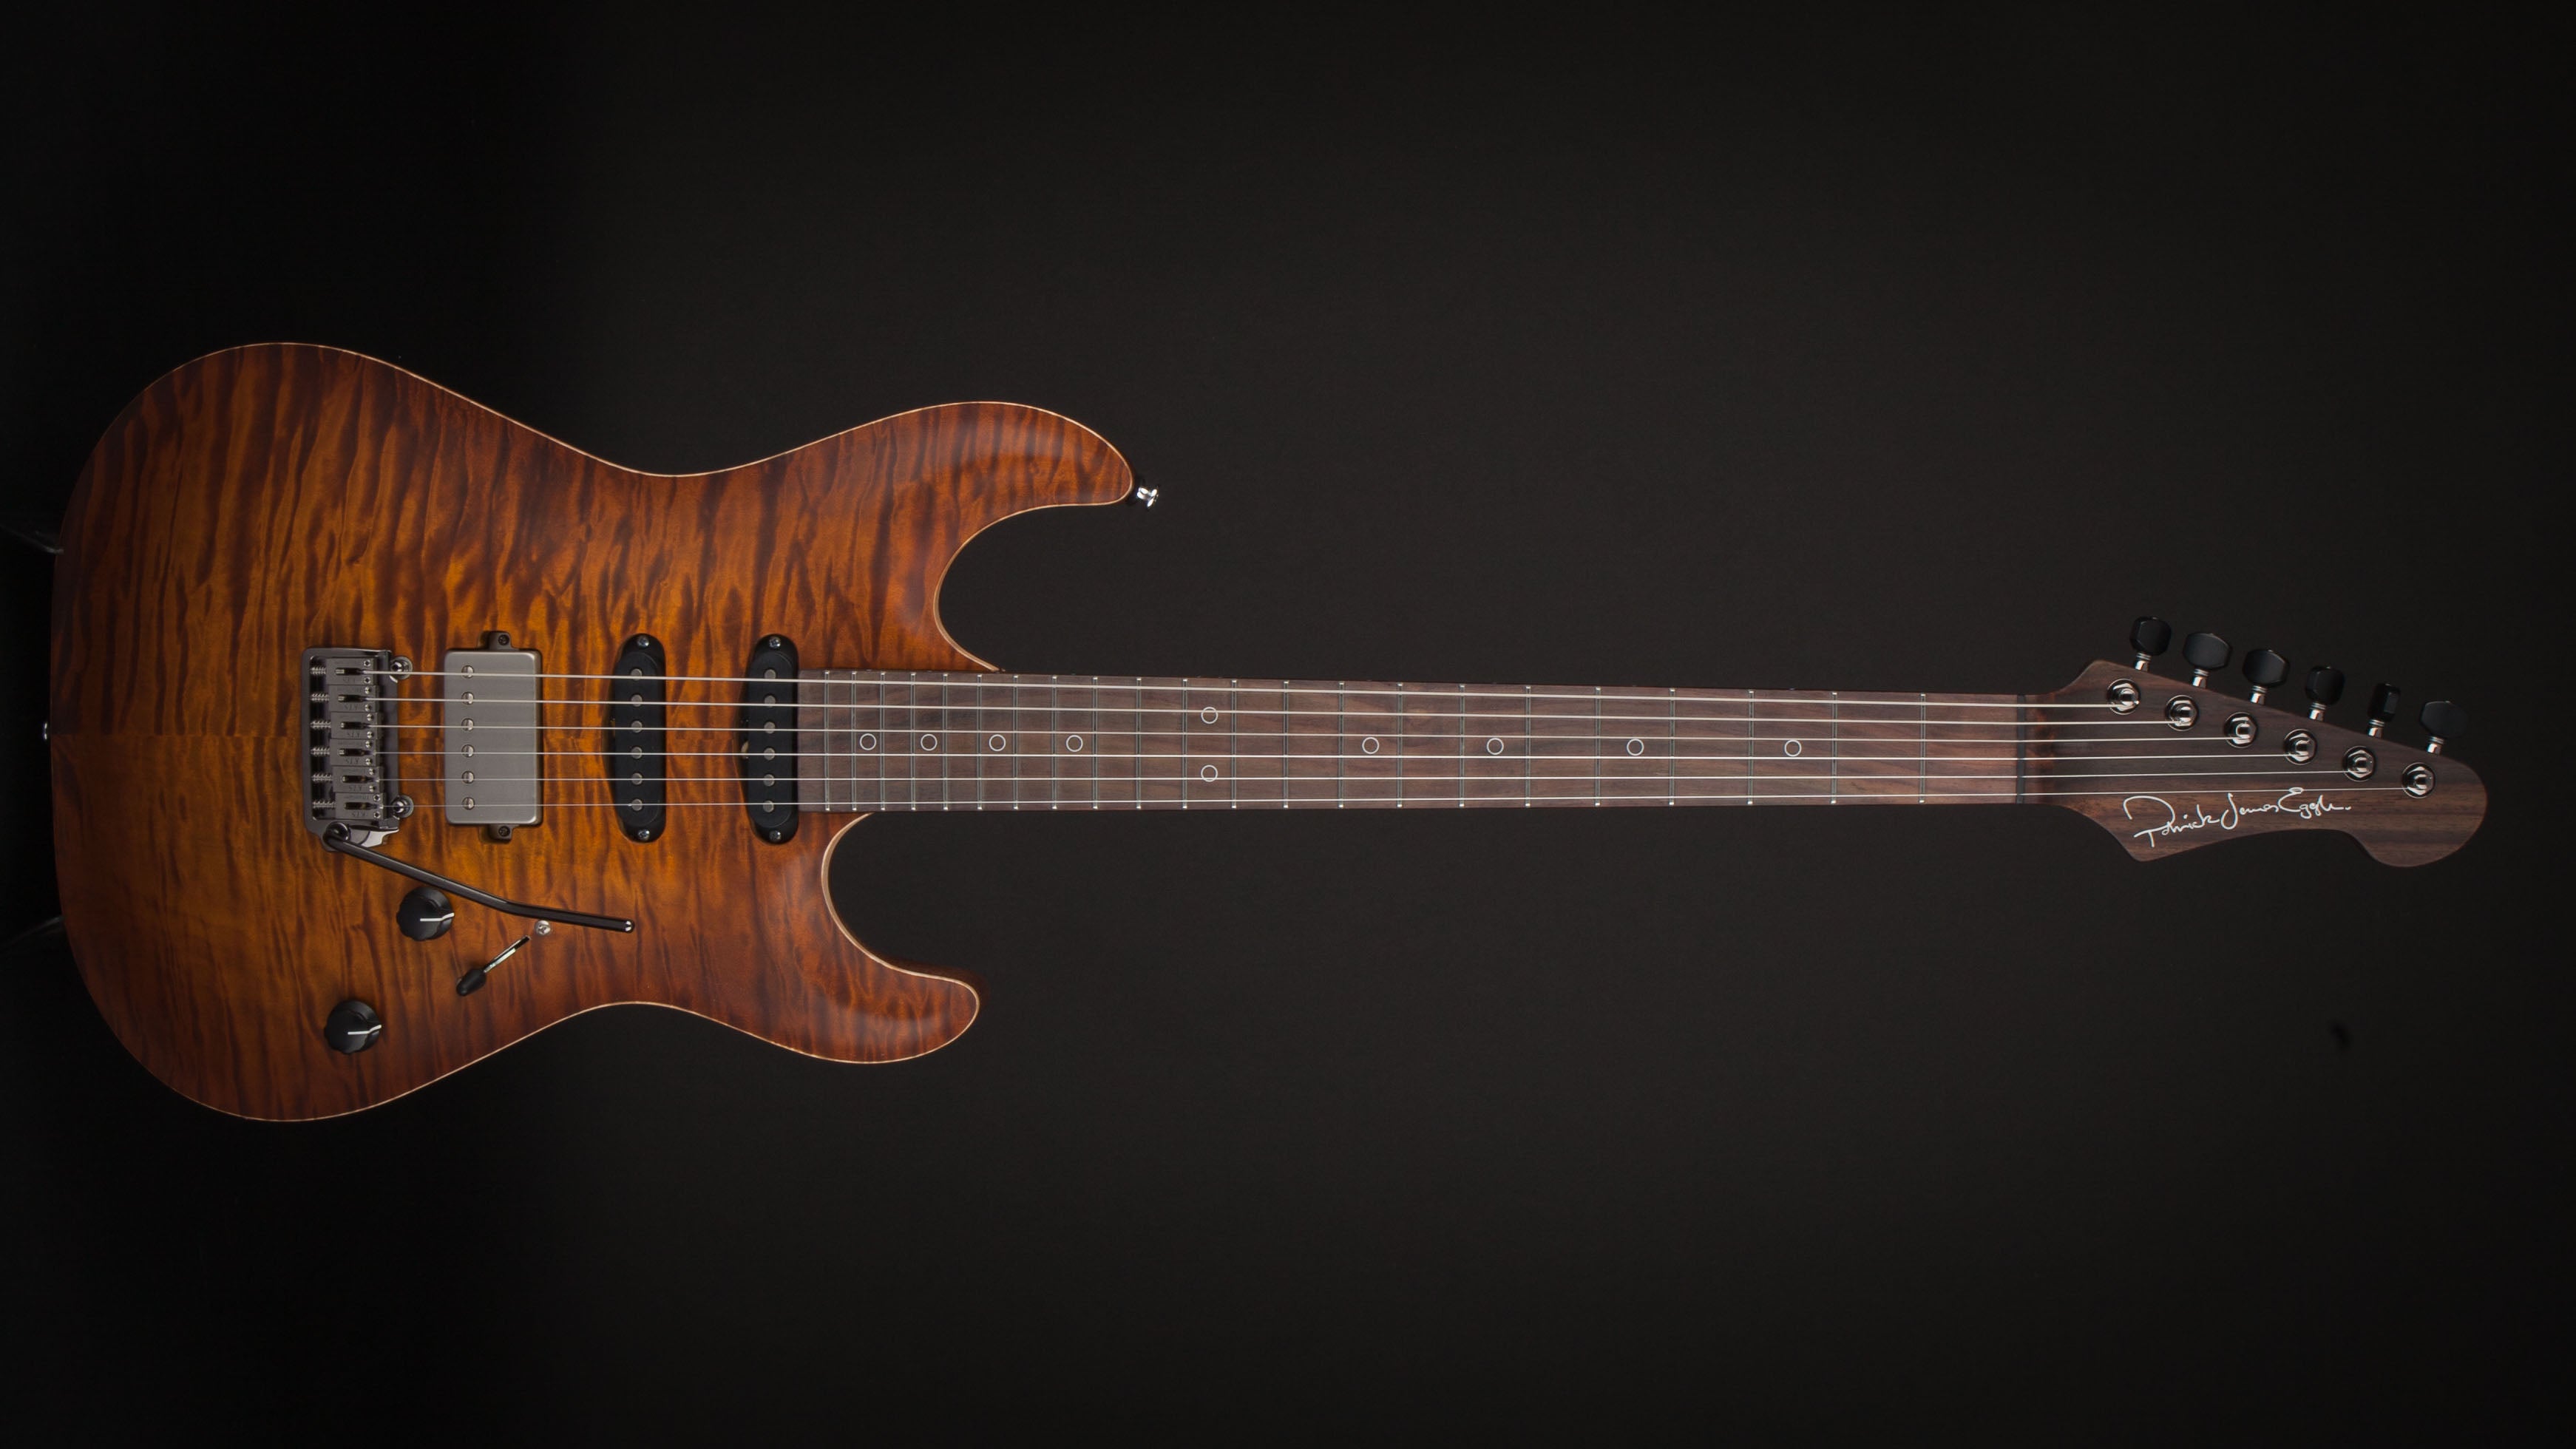 Patrick James Eggle 96 Carved Maple Top with Rosewood Neck #11374